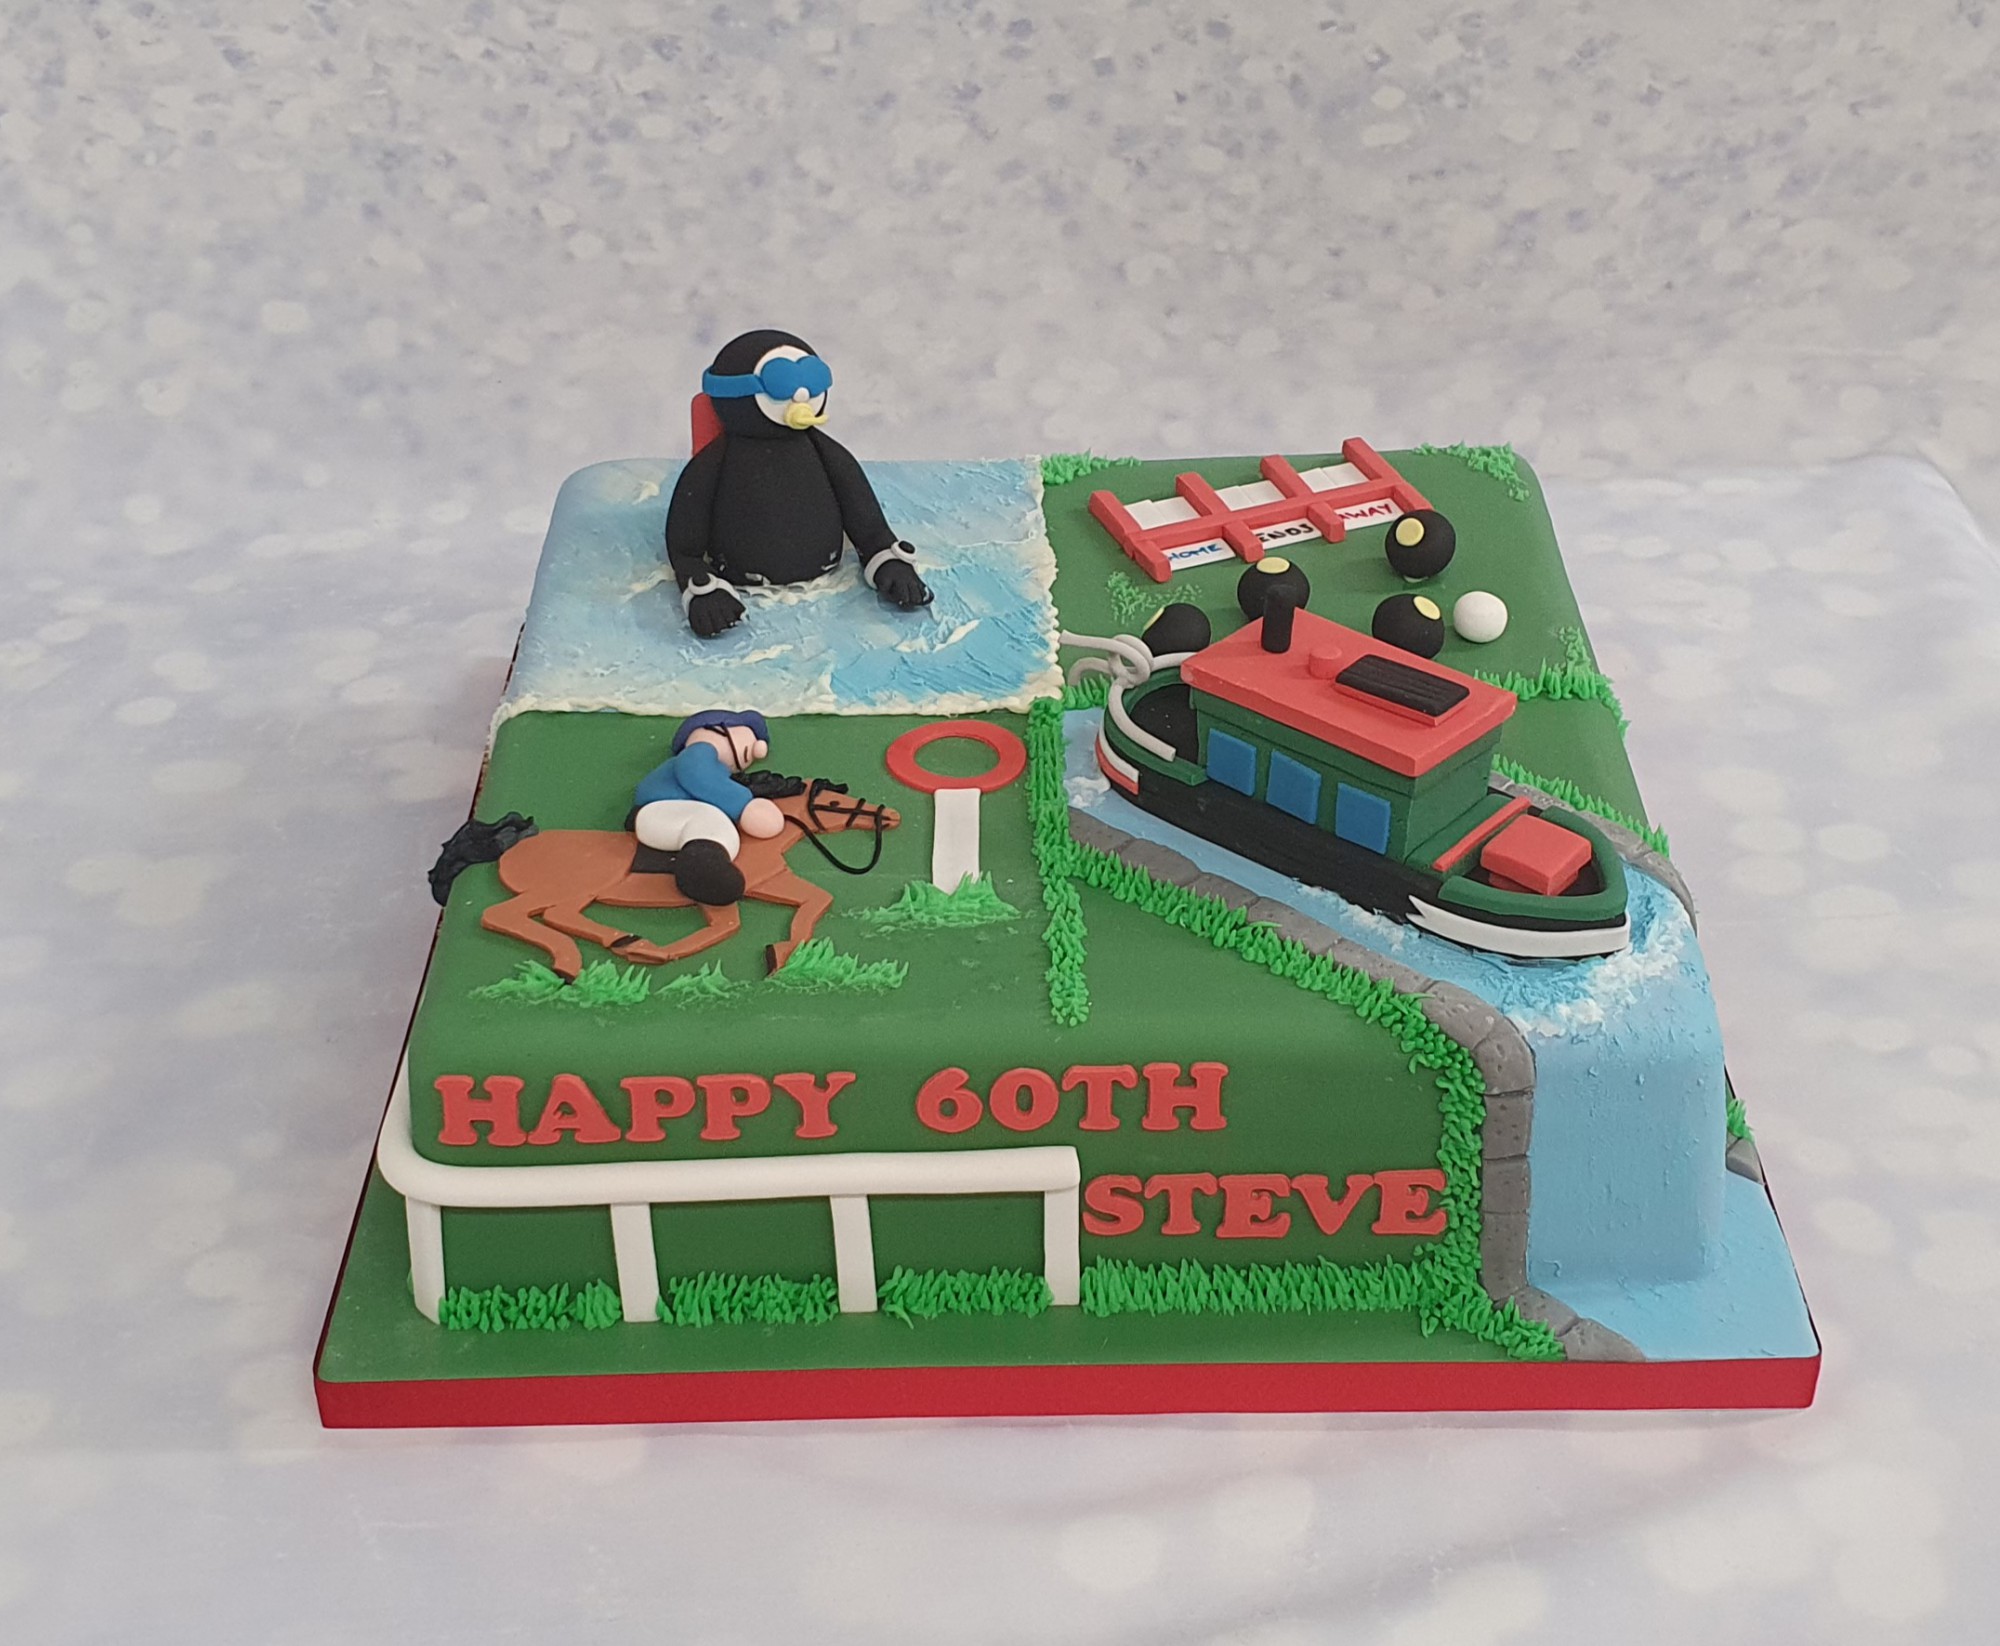 Narrowboat Cake For 60Th Birthday - CakeCentral.com